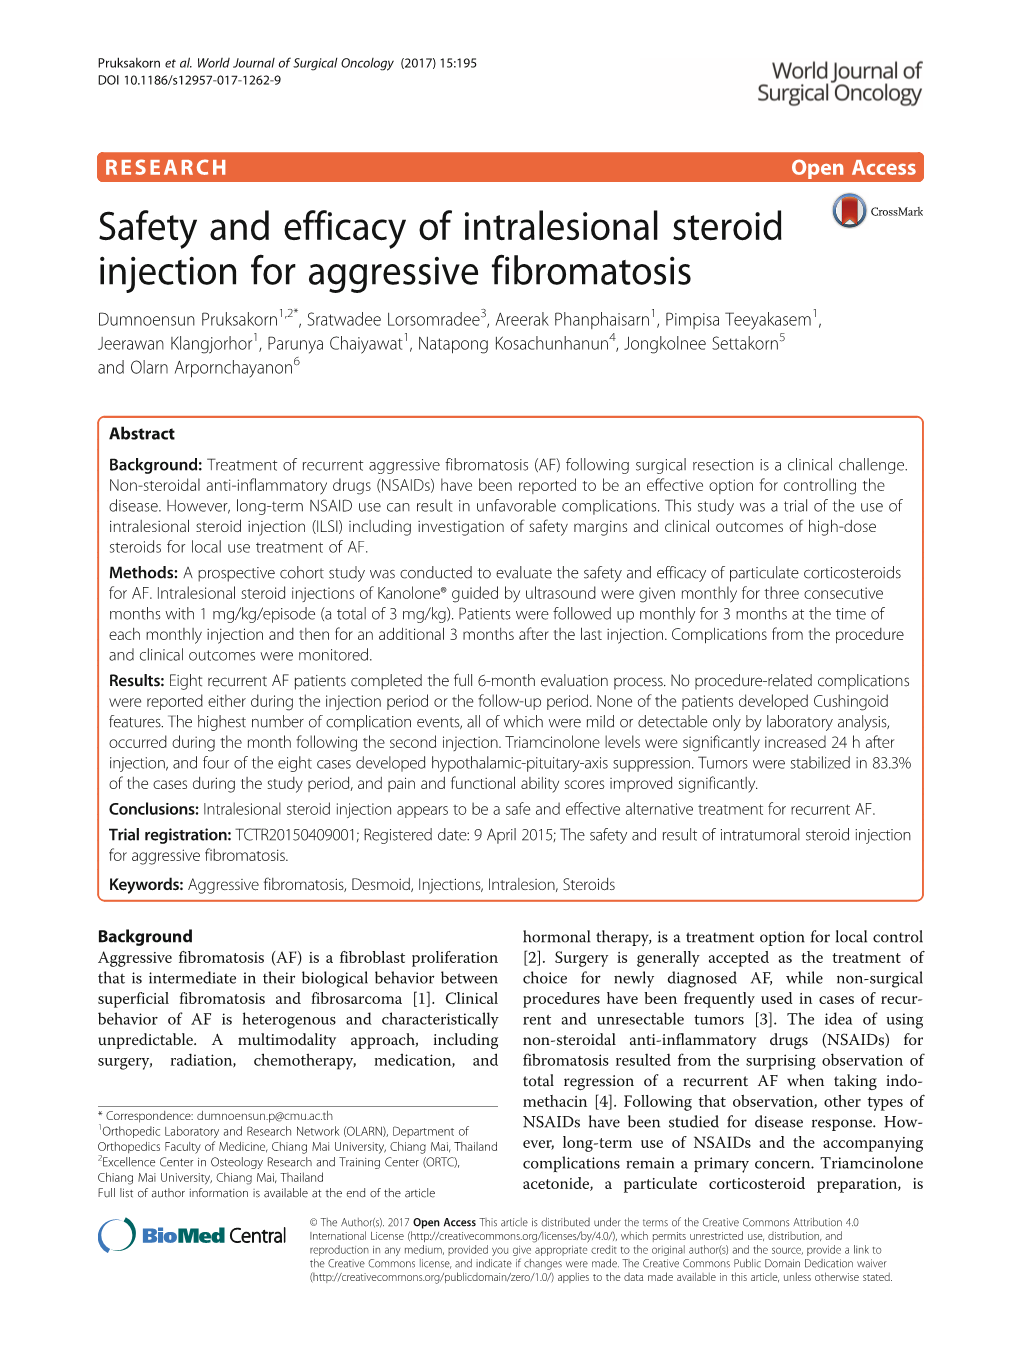 Safety and Efficacy of Intralesional Steroid Injection for Aggressive